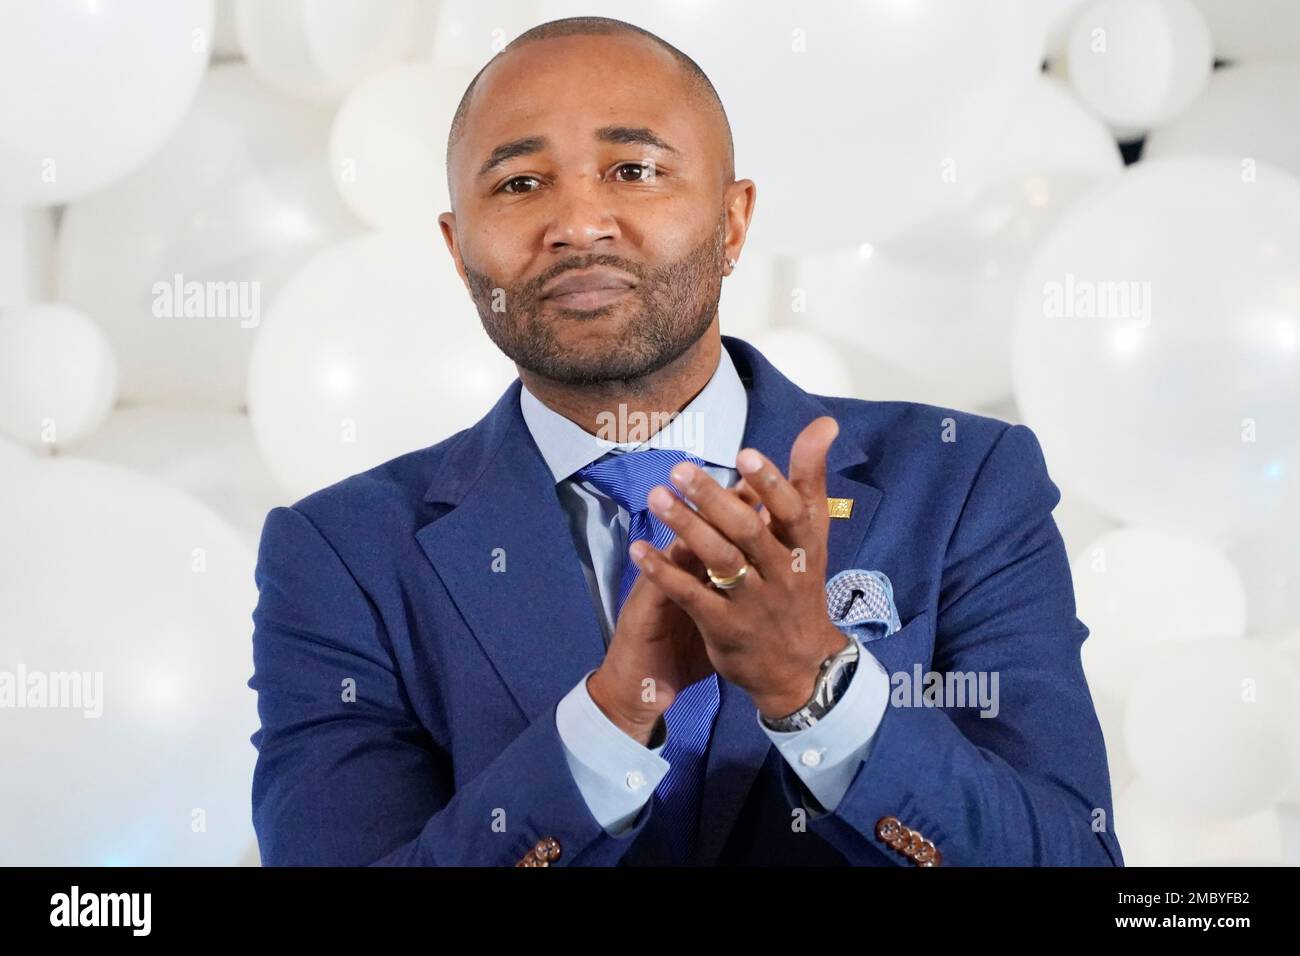 NBA champion and Jackson, Miss., native Mo Williams, speaks of his vision  for the Jackson State basketball team at a news conference announcing his  appointment as the new head coach, Monday, March